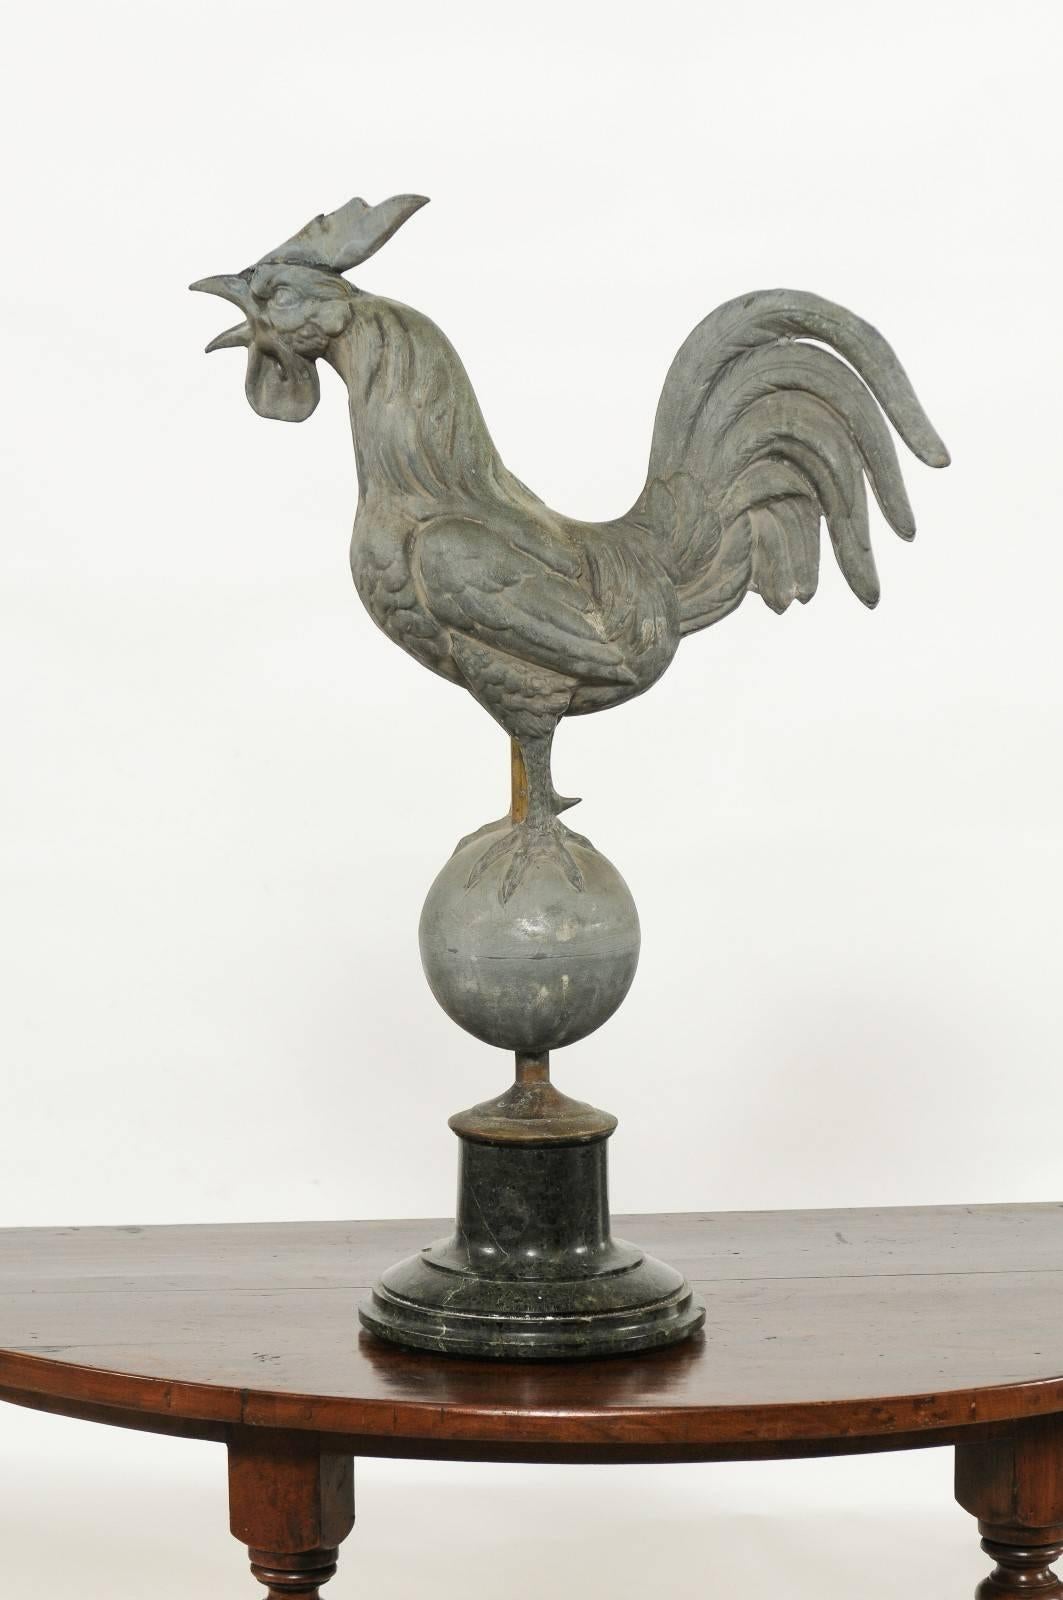 A French zinc rooster weathervane on marble base from the early 20th century. Our rooster, the French national emblem, is represented here crowing. The depiction is quite realistic and particularly lively. The rooster seems to be upset, perhaps is